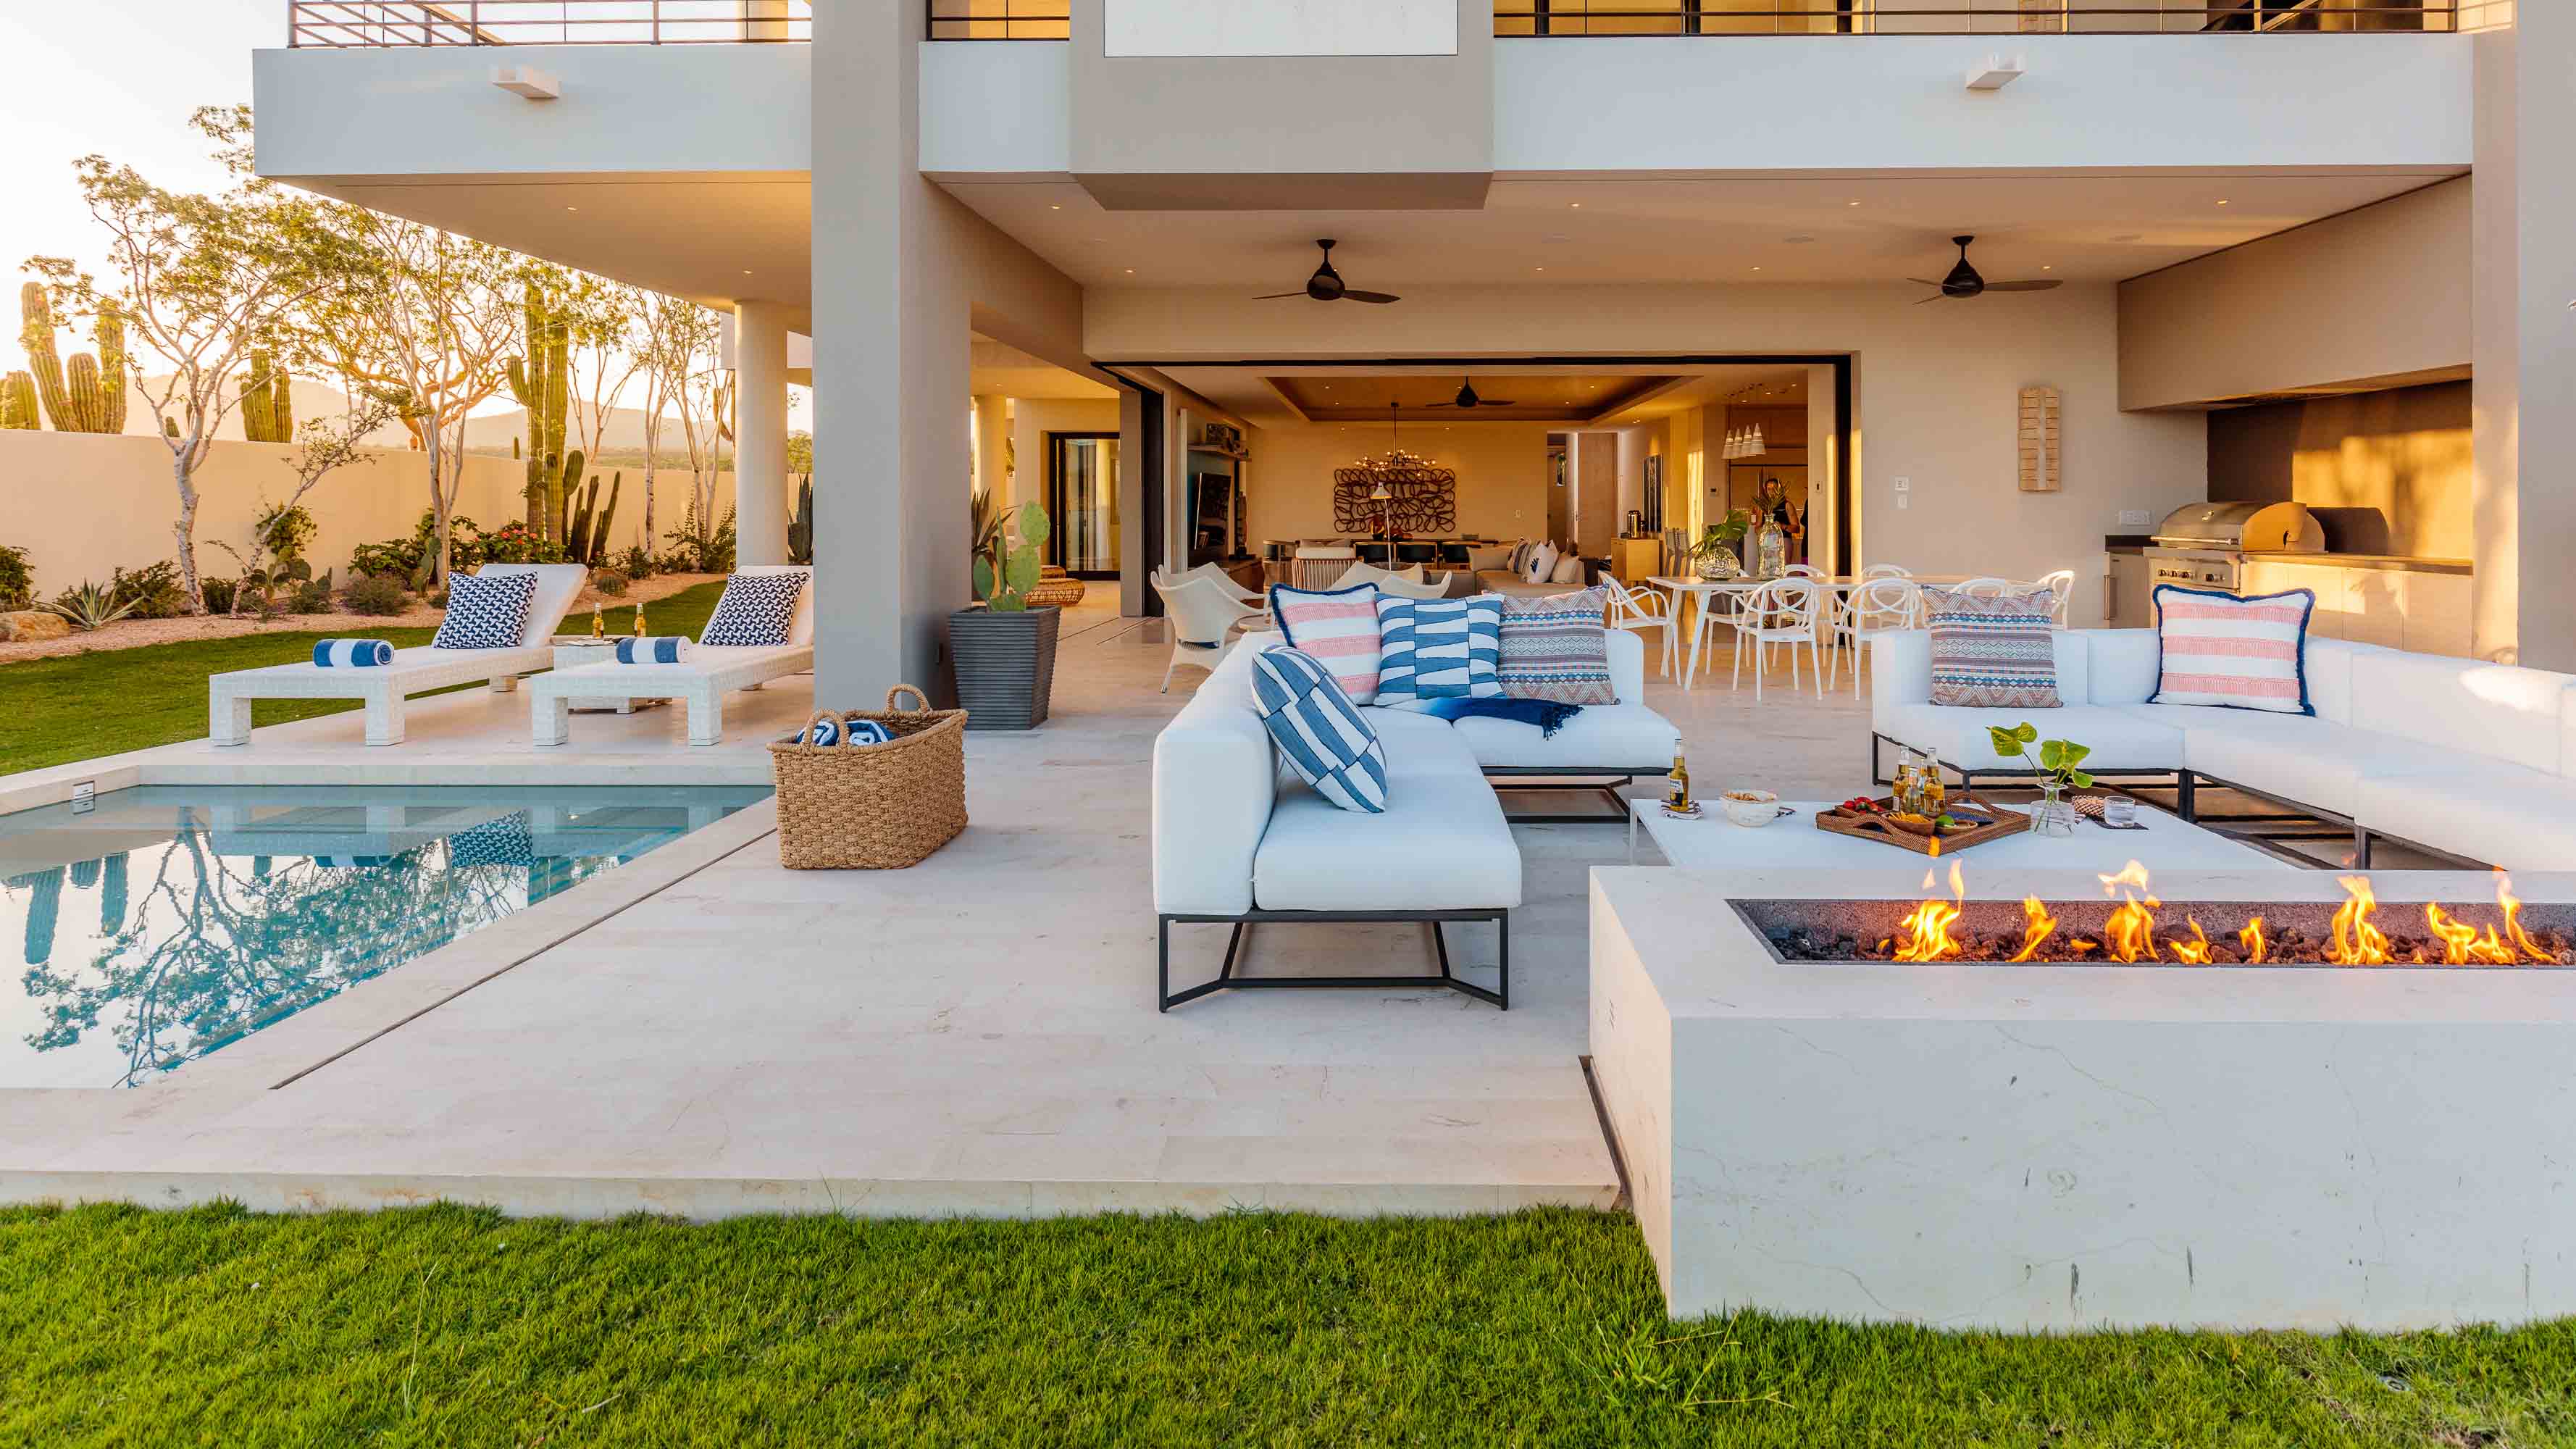 J Banks Design Group envisioned this Maravilla Los Cabos Maxico Outdoor Living space with a Fire Pit